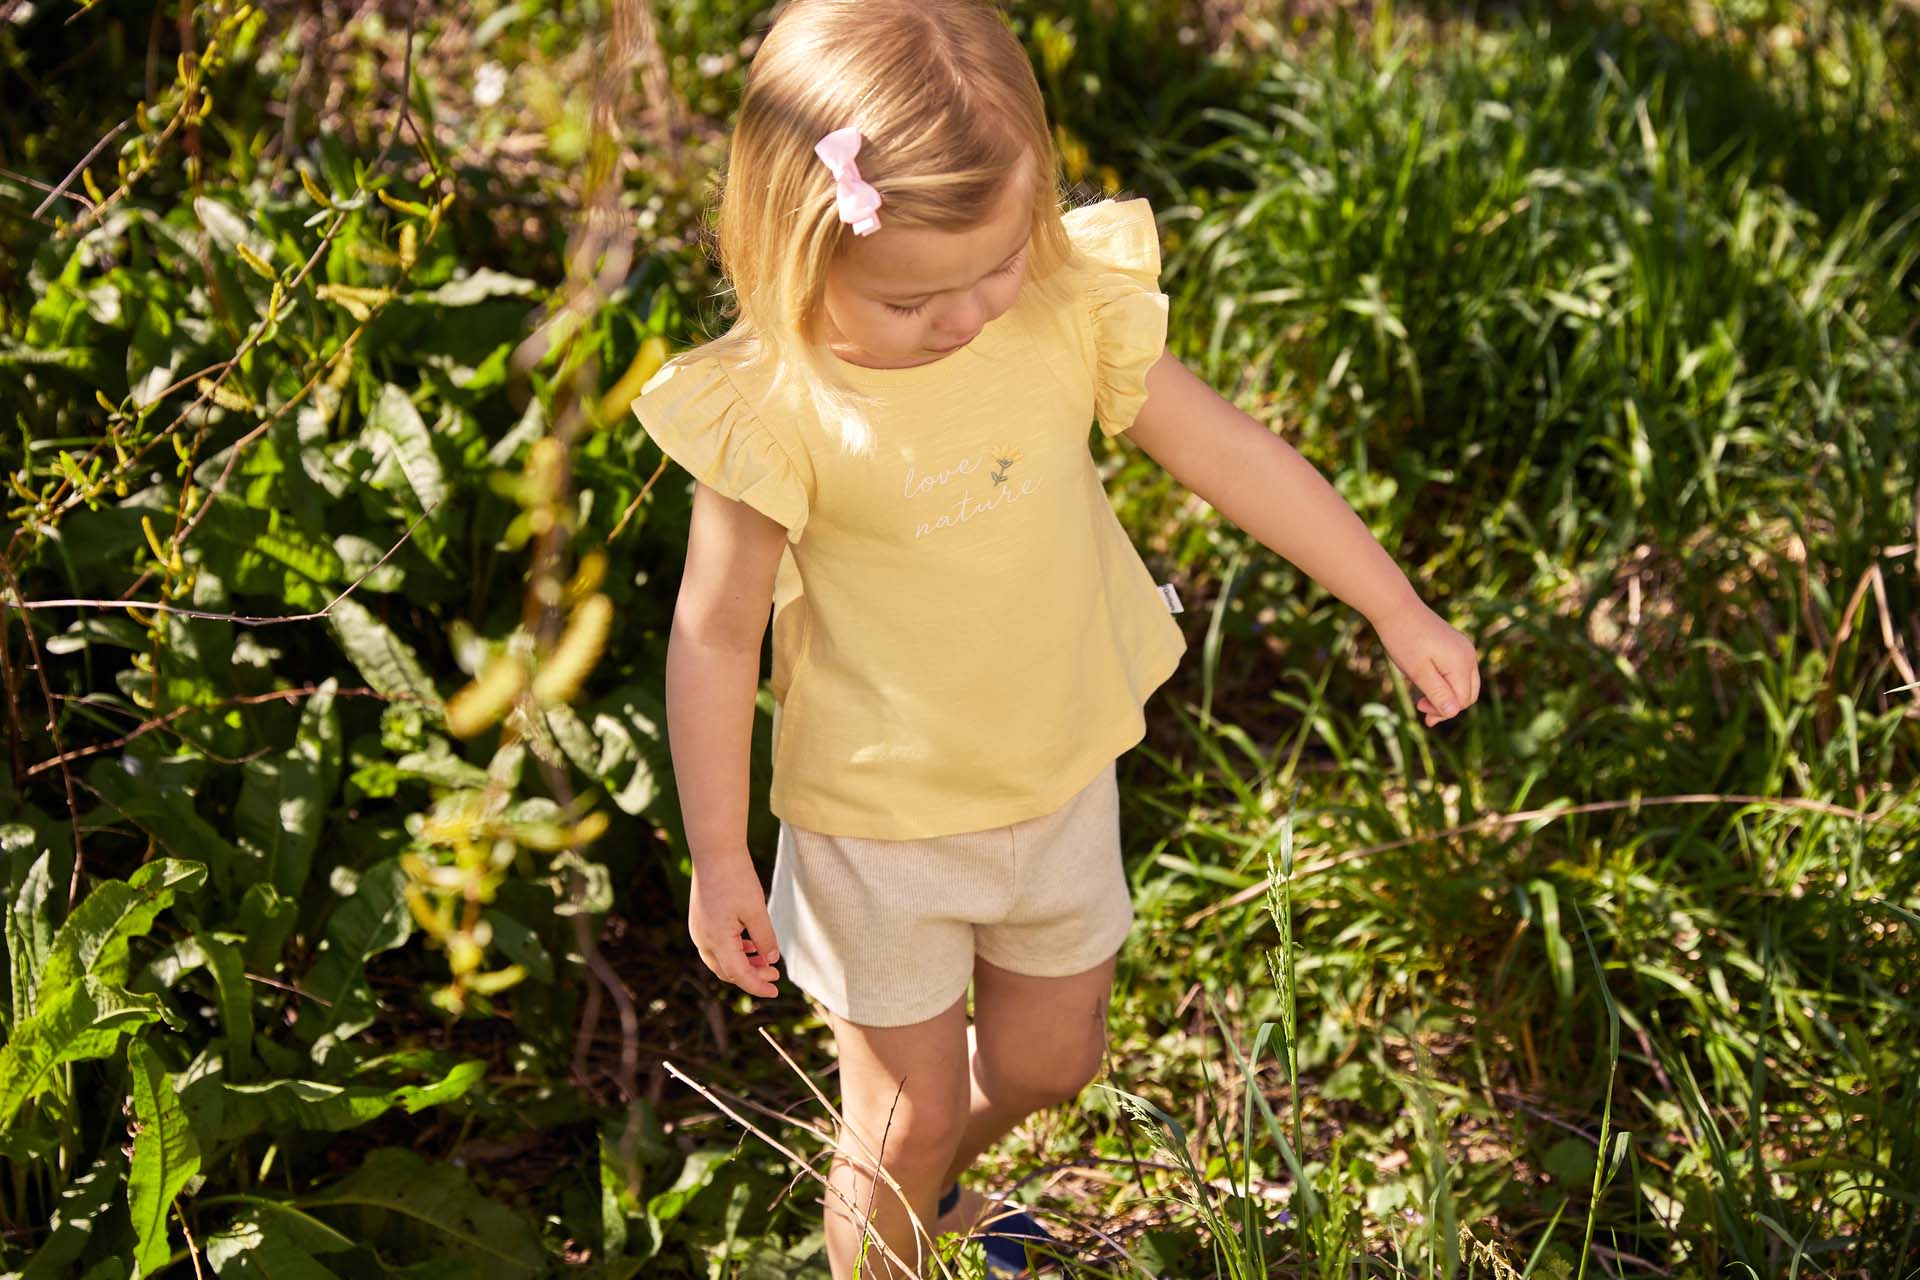 A young girl in a yellow shirt and beige shorts walking through a sunlit field with tall grasses.